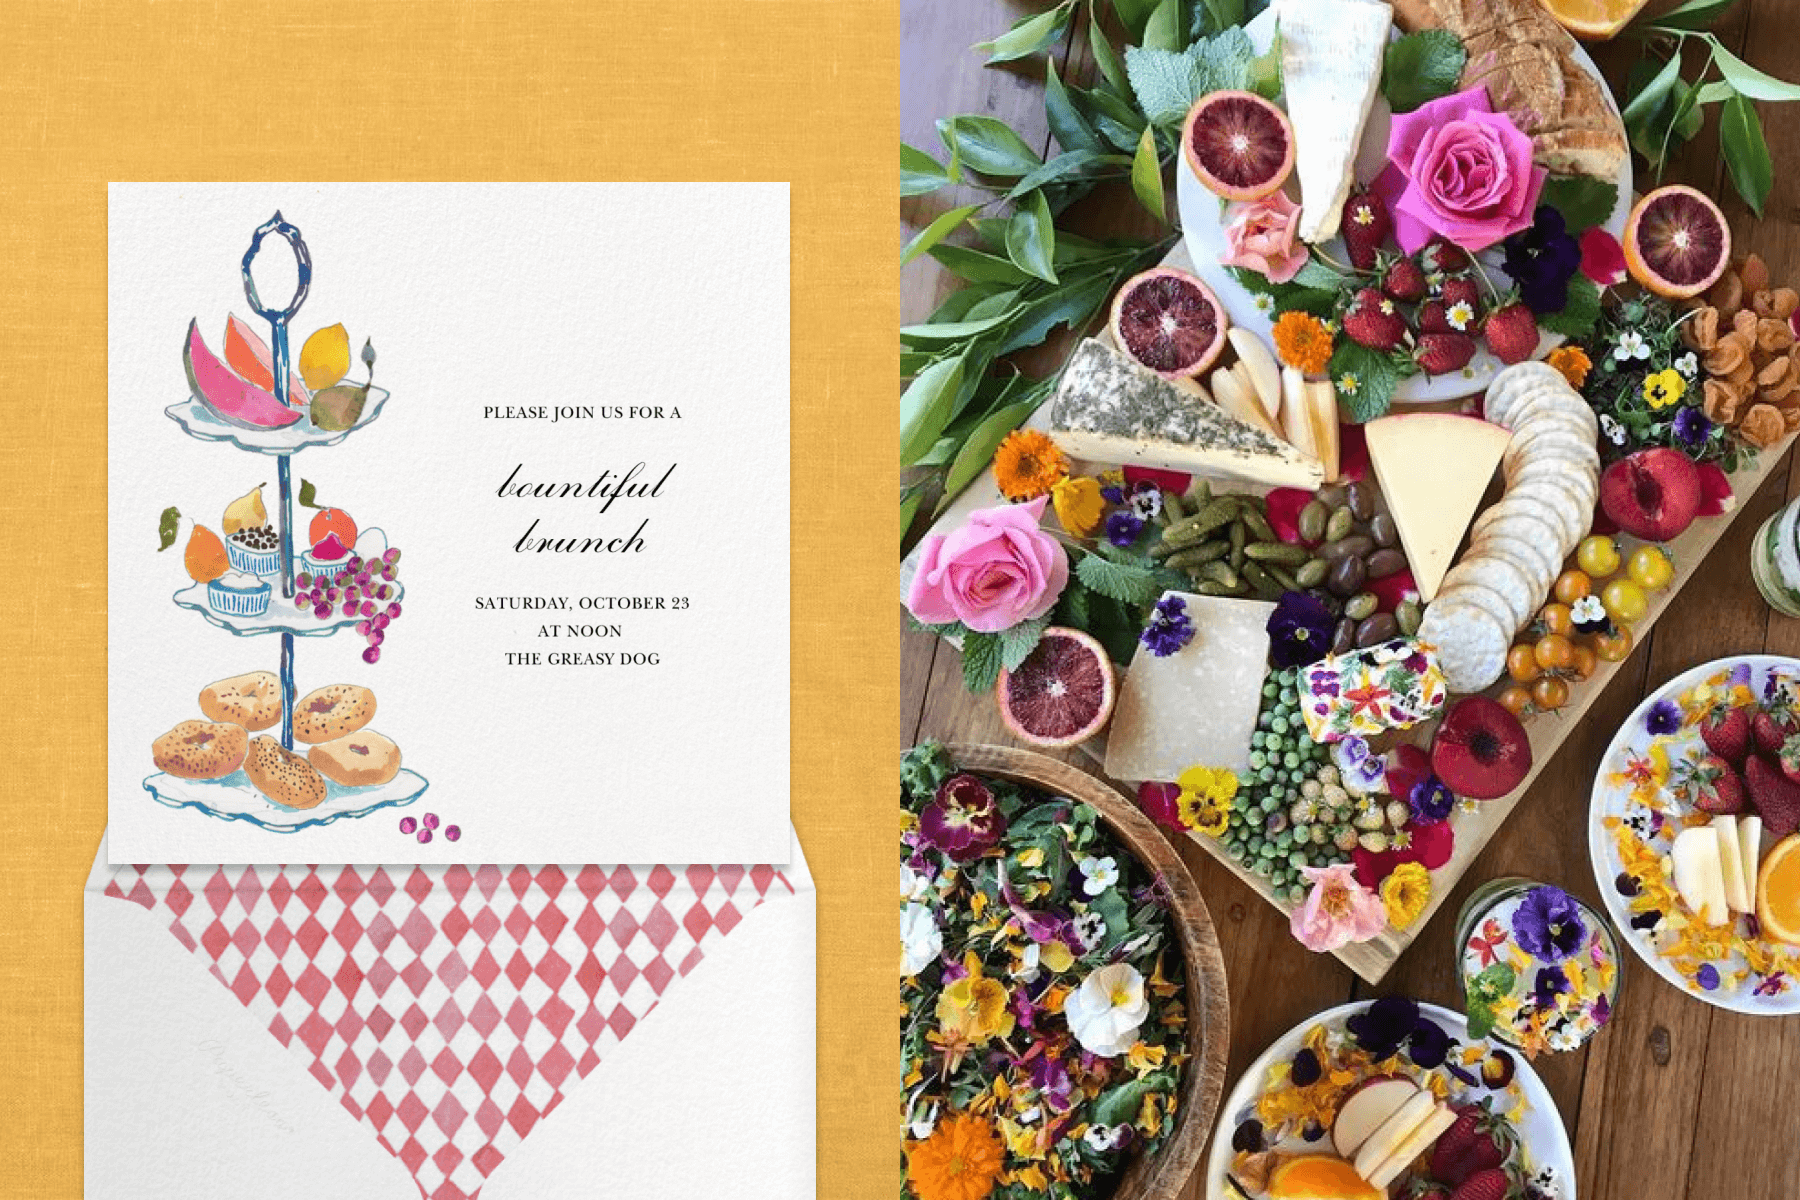 An invitation with a three-tiered snack tray and an envelope with checkerboard liner; colorful cheese and cracker spreads